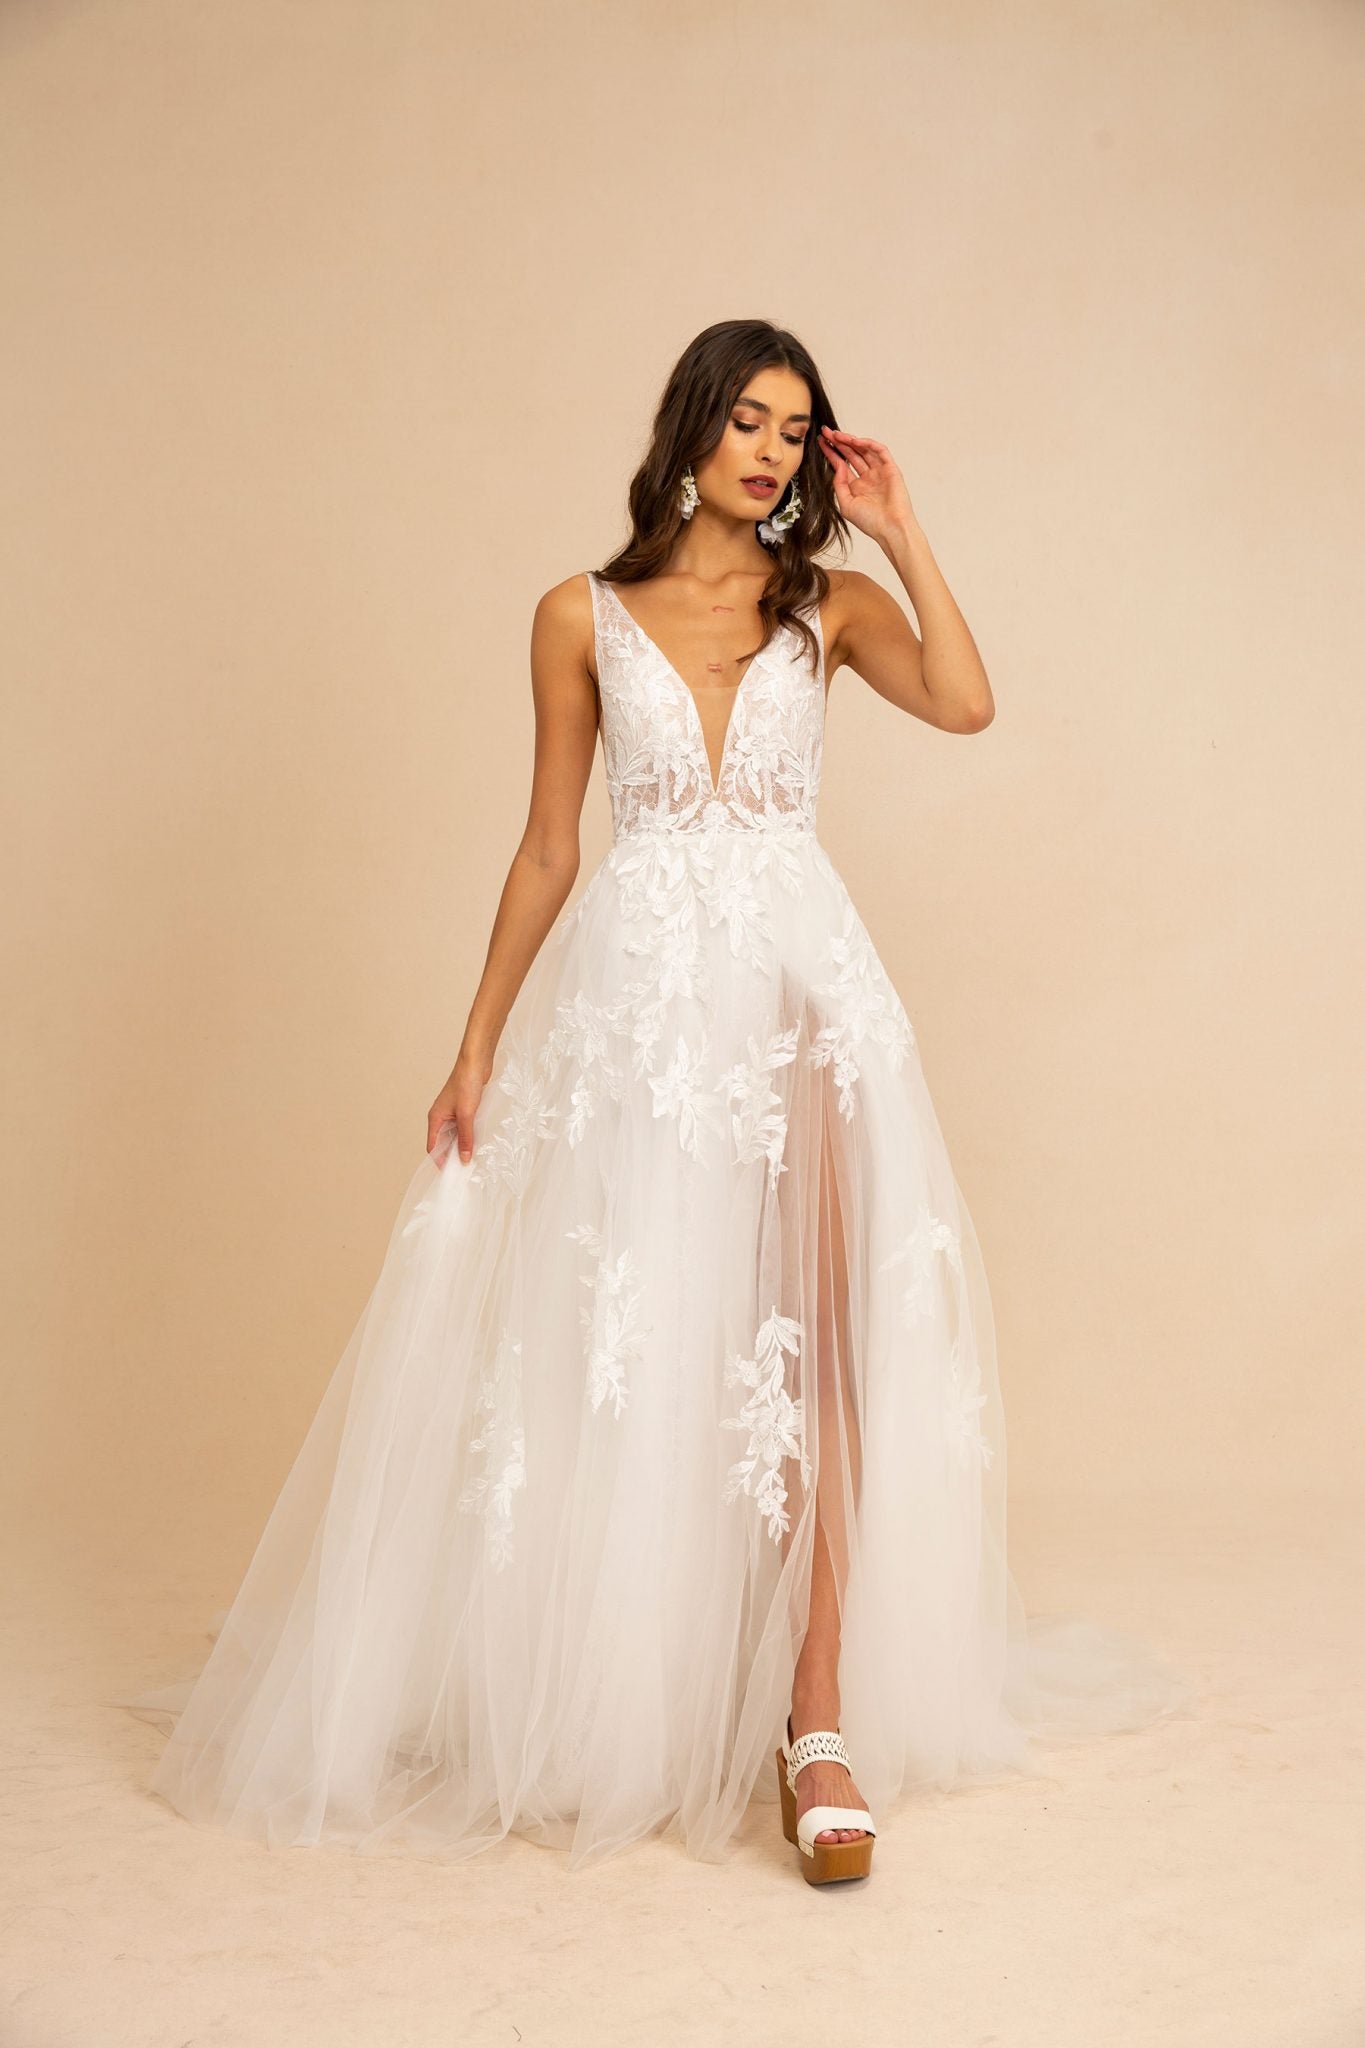 The Giuletta gown is a flirty A-line number featuring stunning lace applique detail adorned throughout the bodice and tulle skirt and a flirty side slit for the subtlest sexy touch.